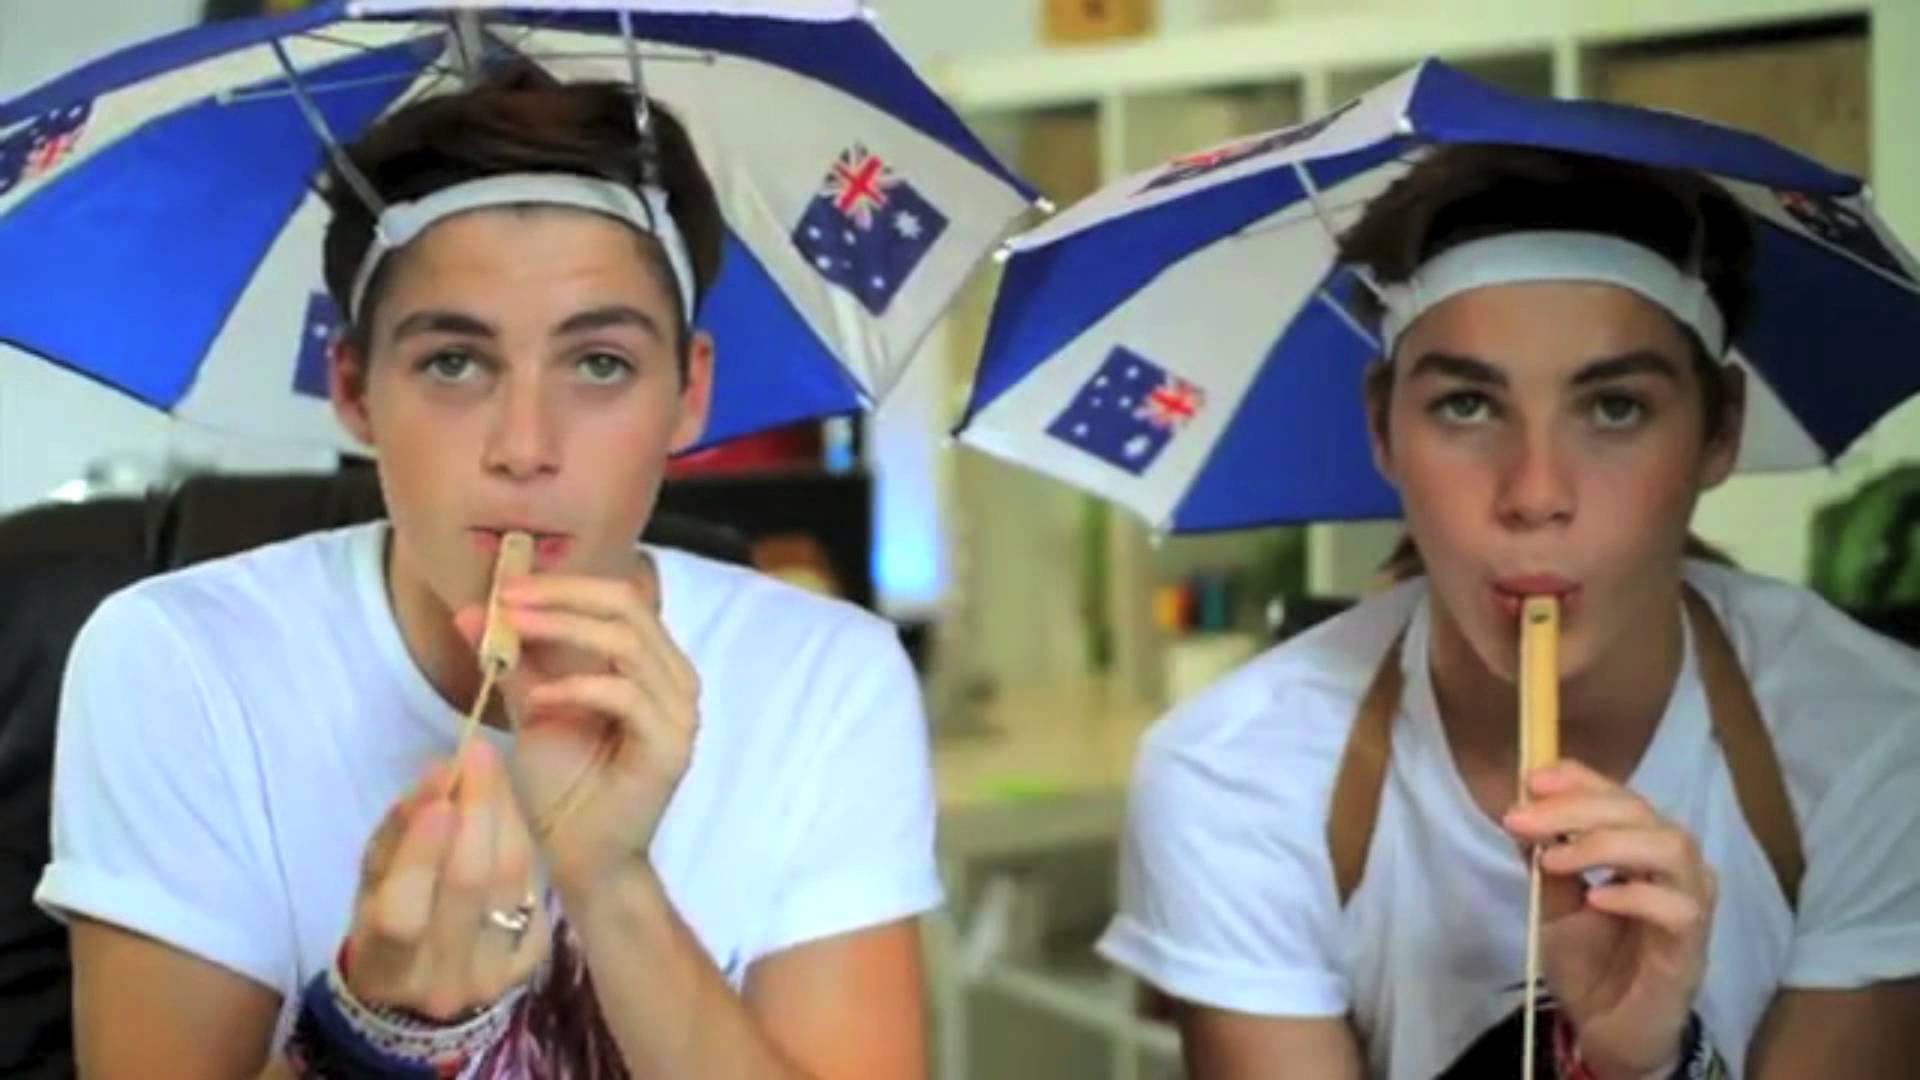 Jack and Finn Harries are Beautiful